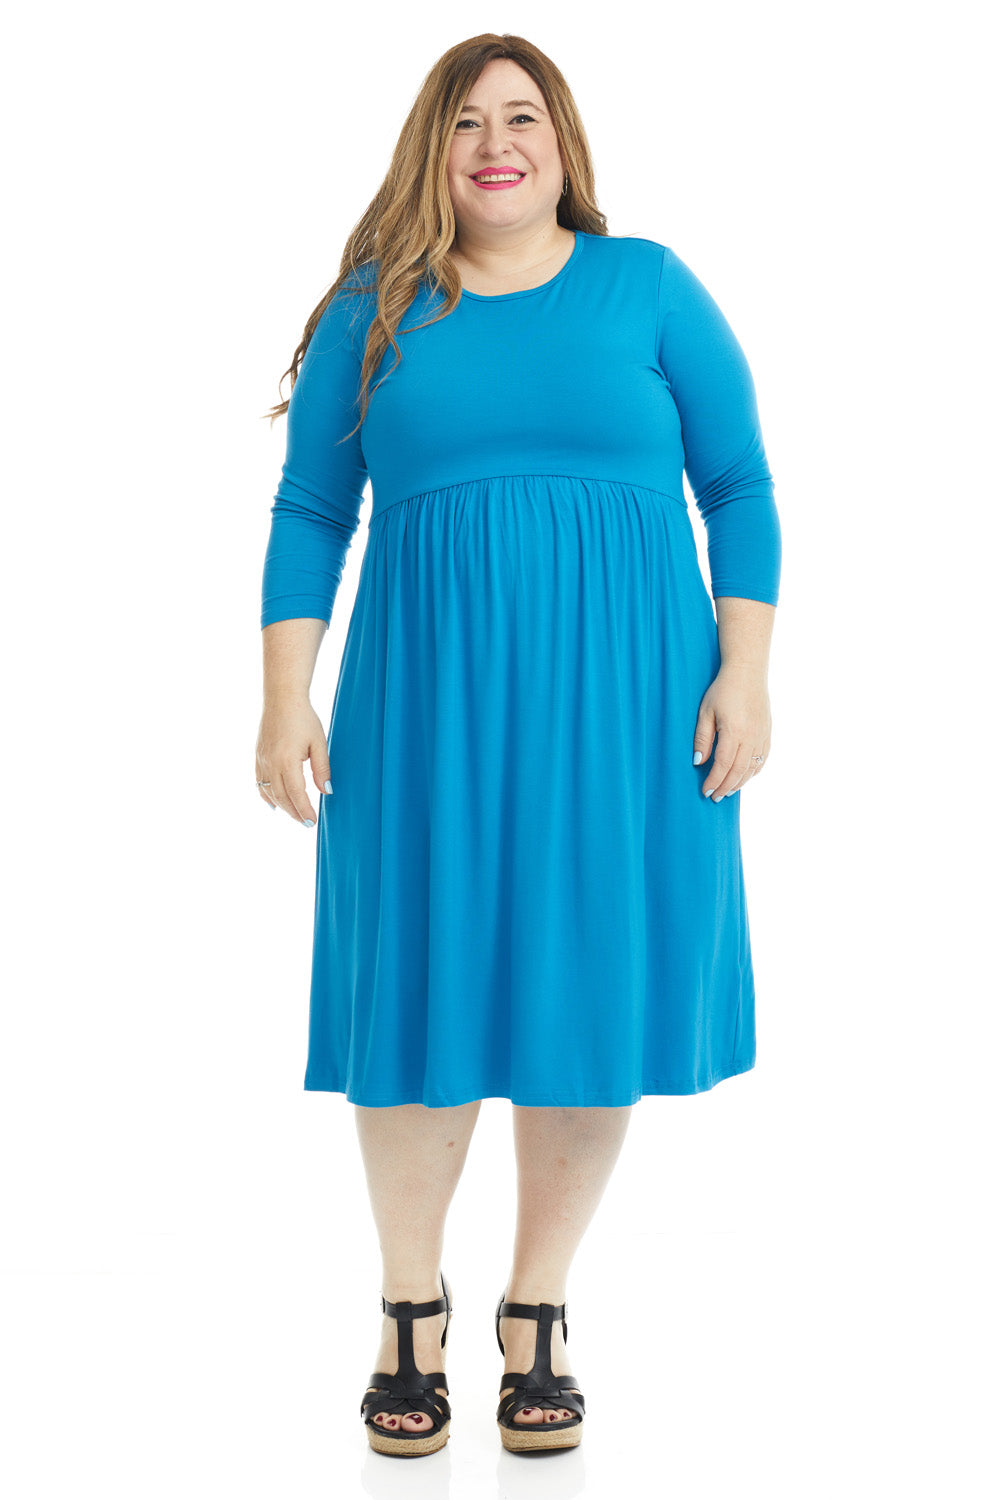 modest 3/4 sleeve below the knee blue plus size swing dress with pockets